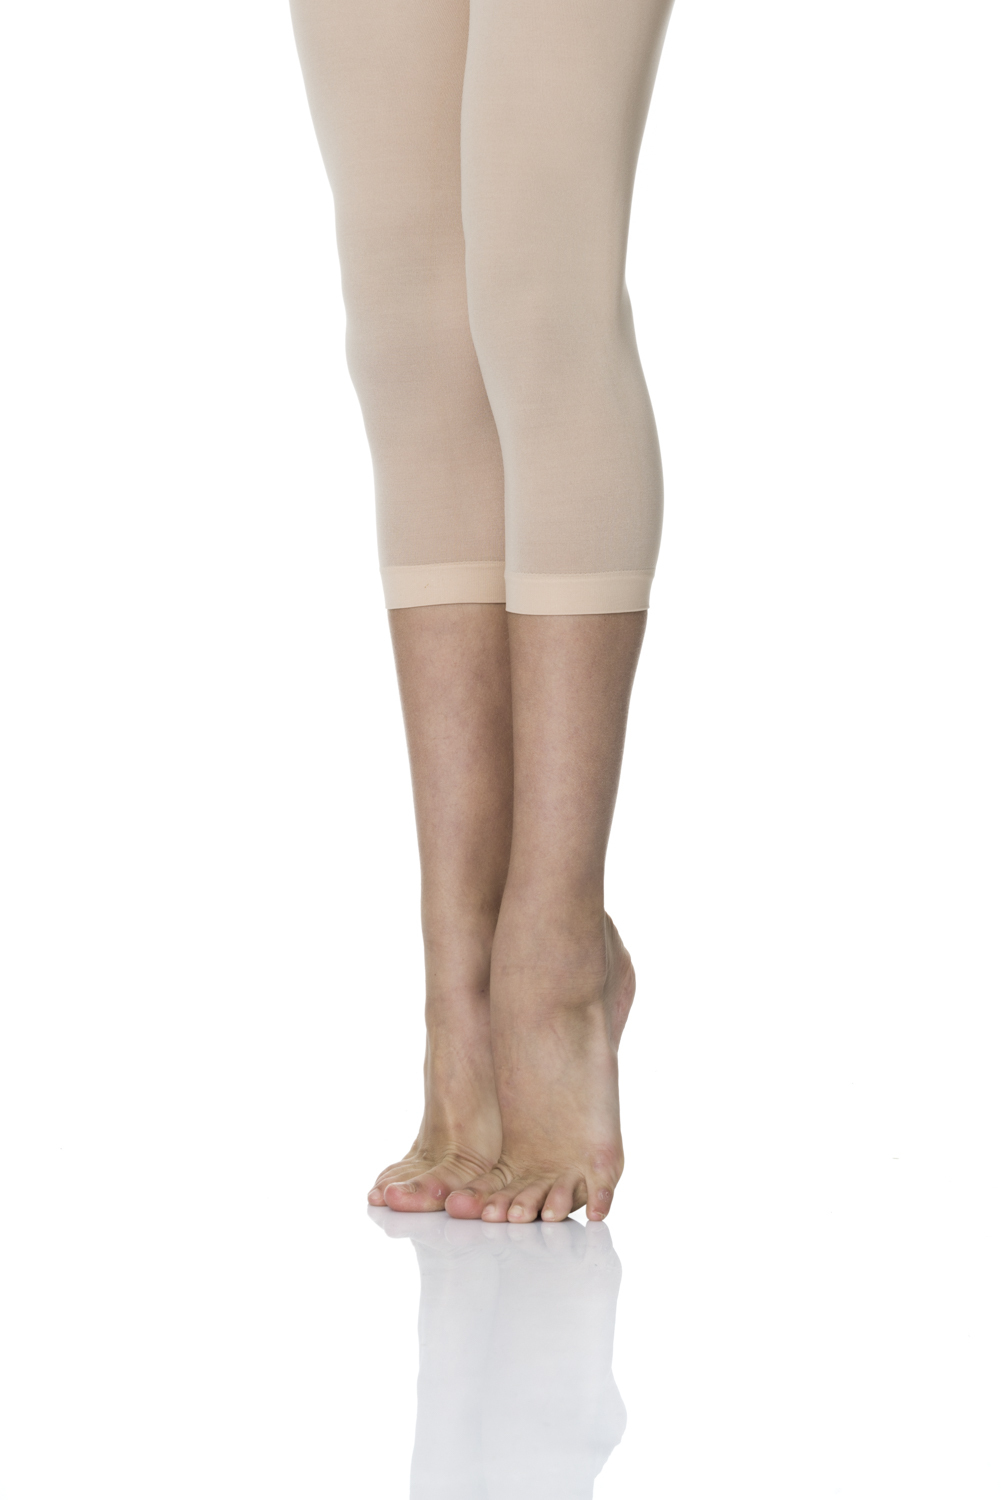 Studio 7 Adult Convertible Dance Tights - Theatrical Pink - The